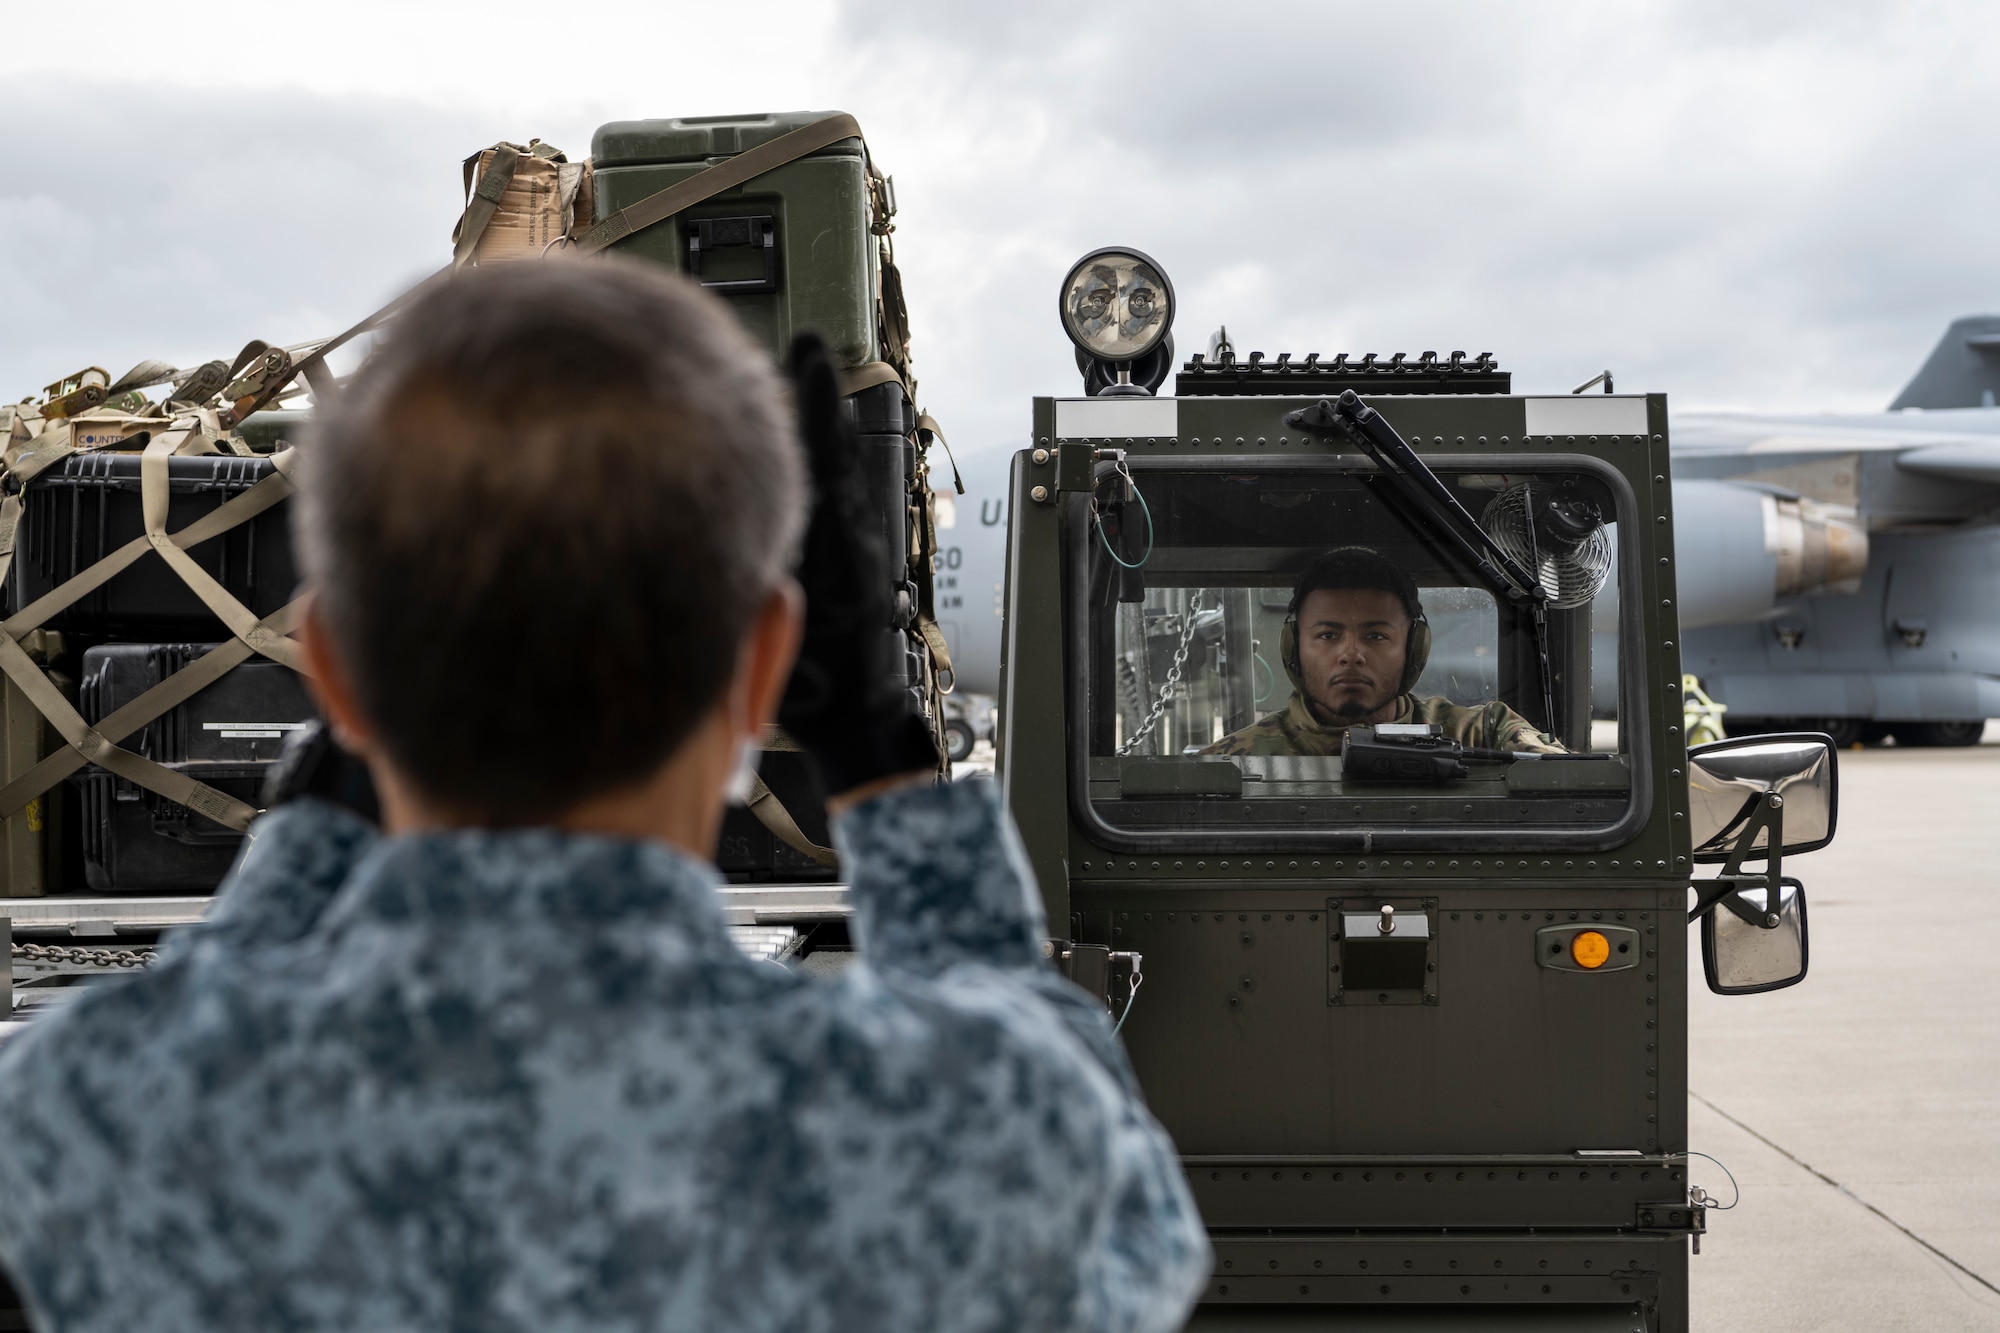 A Republic of Singapore Air Force personnel guides U.S. Air Force Staff Sgt. Jordan Gilchrist, 726th Air Mobility Squadron aircraft services supervisor, as he operates a Tunner 60K aircraft cargo loader on Spangdahlem Air Base, Germany, Aug. 29, 2021.